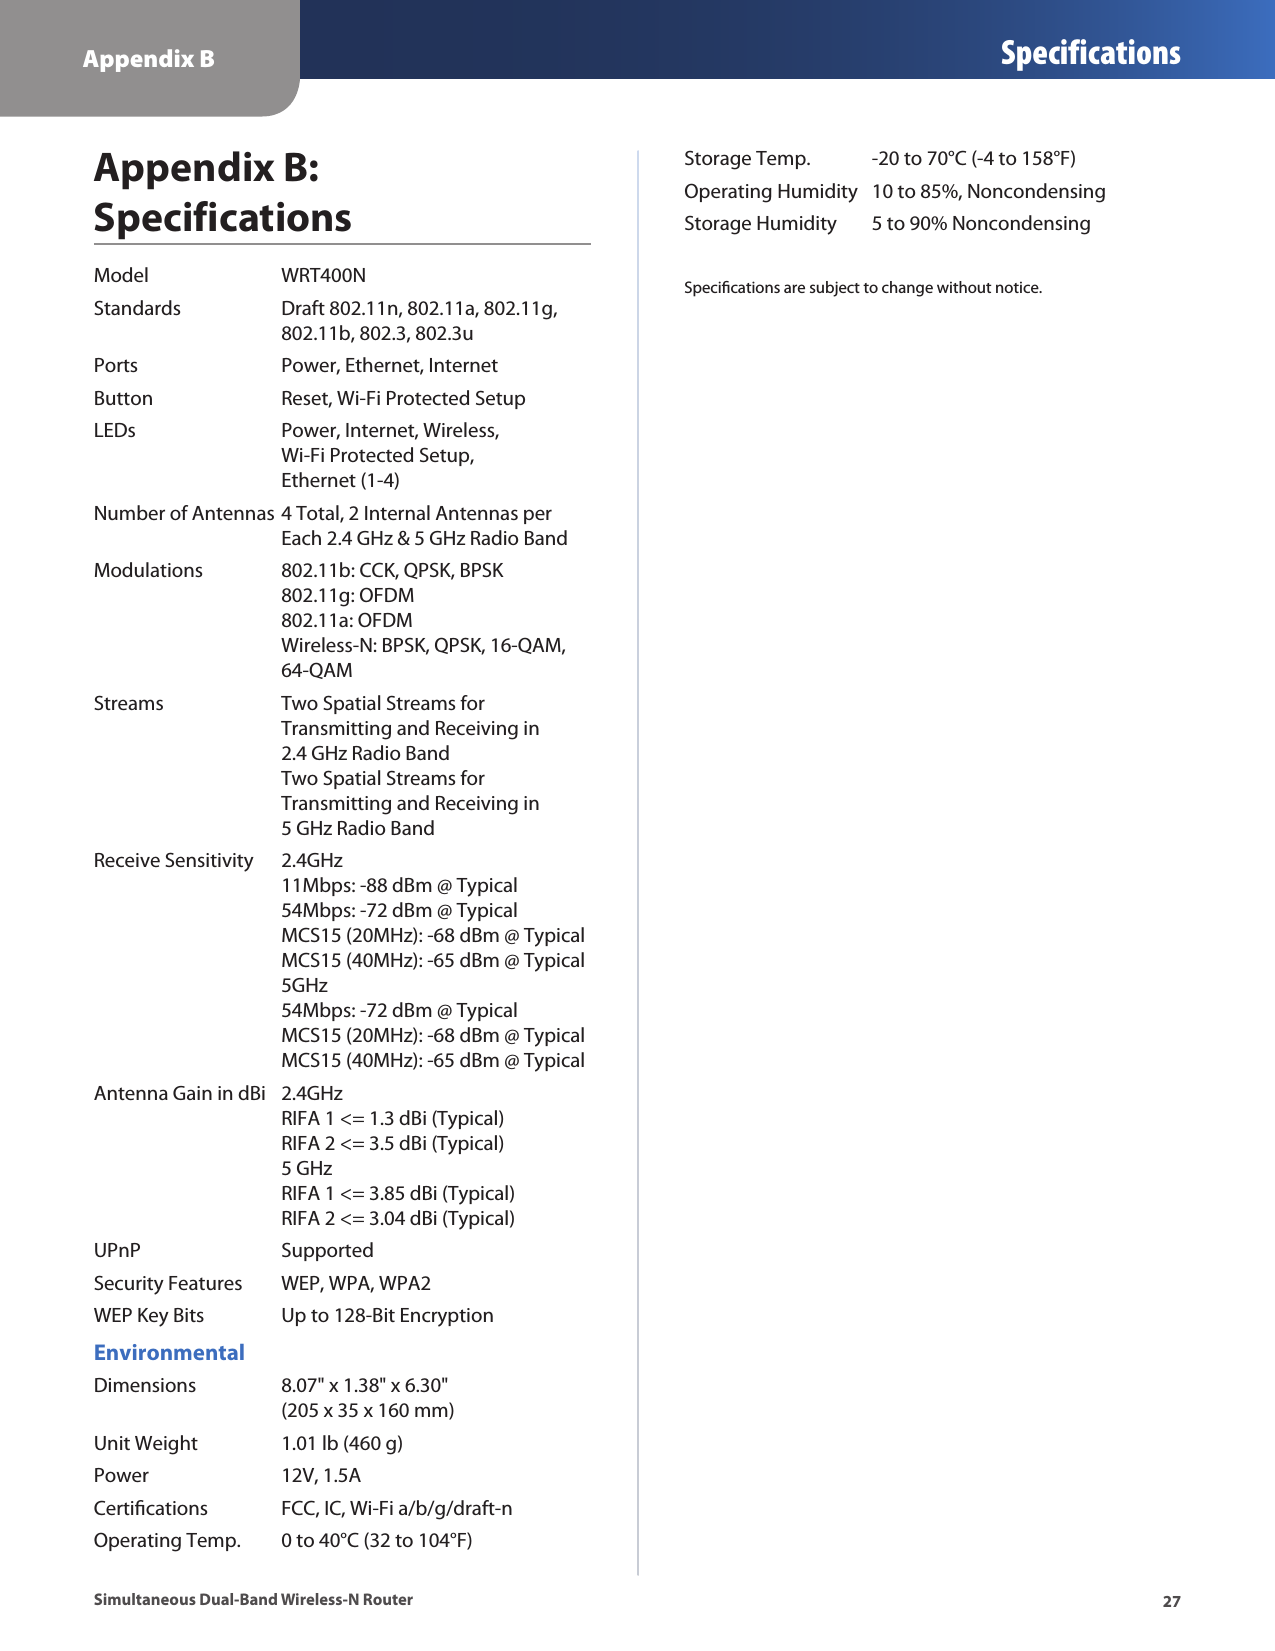 Appendix B Specifications27Simultaneous Dual-Band Wireless-N RouterAppendix B:  SpecificationsModel  WRT400NStandards  Draft 802.11n, 802.11a, 802.11g,   802.11b, 802.3, 802.3uPorts  Power, Ethernet, InternetButton  Reset, Wi-Fi Protected SetupLEDs  Power, Internet, Wireless,    Wi-Fi Protected Setup,   Ethernet (1-4)Number of Antennas 4 Total, 2 Internal Antennas per    Each 2.4 GHz &amp; 5 GHz Radio BandModulations  802.11b: CCK, QPSK, BPSK    802.11g: OFDM   802.11a: OFDM   Wireless-N: BPSK, QPSK, 16-QAM,   64-QAMStreams  Two Spatial Streams for    Transmitting and Receiving in    2.4 GHz Radio Band   Two Spatial Streams for    Transmitting and Receiving in    5 GHz Radio BandReceive Sensitivity  2.4GHz   11Mbps: -88 dBm @ Typical   54Mbps: -72 dBm @ Typical   MCS15 (20MHz): -68 dBm @ Typical   MCS15 (40MHz): -65 dBm @ Typical   5GHz   54Mbps: -72 dBm @ Typical   MCS15 (20MHz): -68 dBm @ Typical   MCS15 (40MHz): -65 dBm @ TypicalAntenna Gain in dBi  2.4GHz   RIFA 1 &lt;= 1.3 dBi (Typical)   RIFA 2 &lt;= 3.5 dBi (Typical)   5 GHz   RIFA 1 &lt;= 3.85 dBi (Typical)   RIFA 2 &lt;= 3.04 dBi (Typical)UPnP   SupportedSecurity Features  WEP, WPA, WPA2WEP Key Bits  Up to 128-Bit EncryptionEnvironmentalDimensions  8.07&quot; x 1.38&quot; x 6.30&quot;   (205 x 35 x 160 mm)Unit Weight  1.01 lb (460 g)Power  12V, 1.5ACertications  FCC, IC, Wi-Fi a/b/g/draft-nOperating Temp.  0 to 40°C (32 to 104°F)Storage Temp.  -20 to 70°C (-4 to 158°F)Operating Humidity  10 to 85%, NoncondensingStorage Humidity  5 to 90% NoncondensingSpecications are subject to change without notice.